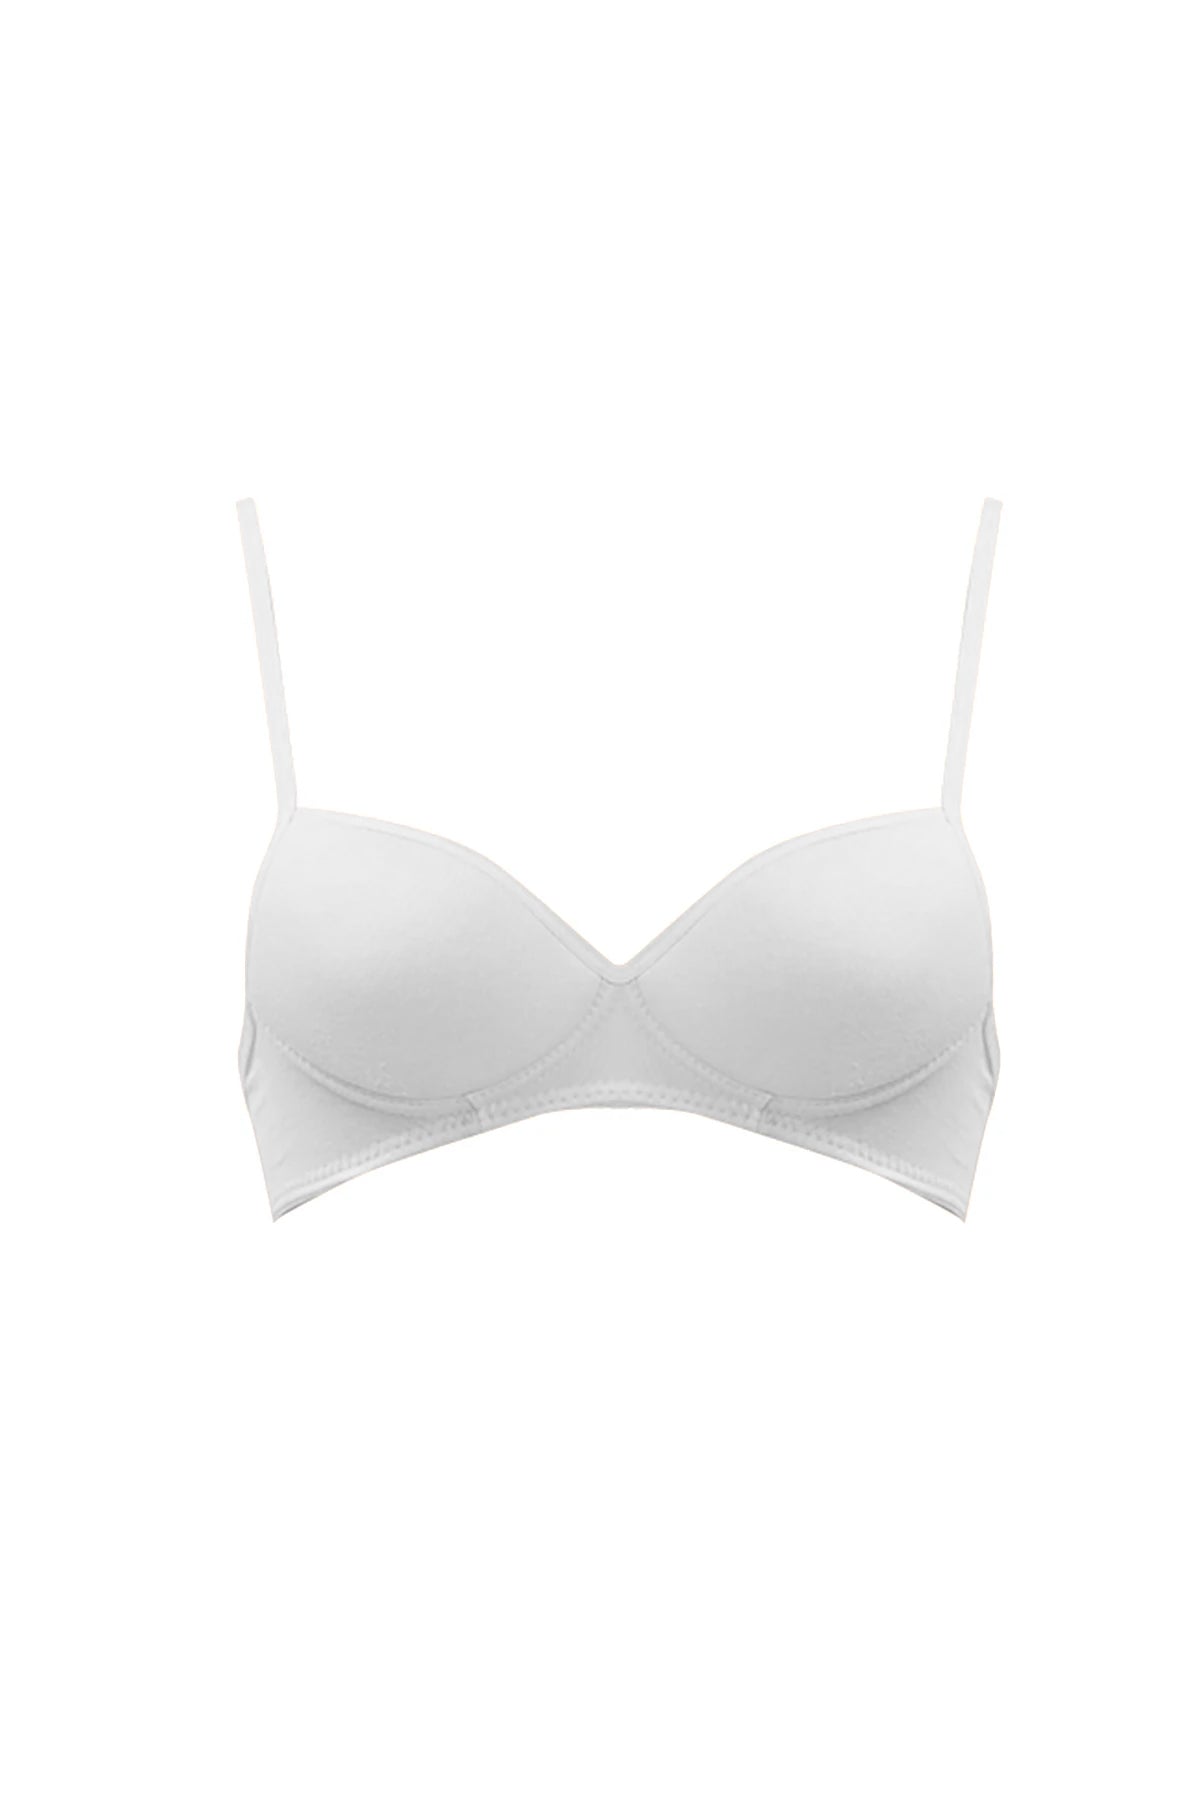 Lovable White30B Brassiere at Rs 155/piece, Pondy Bazaar, Vellore